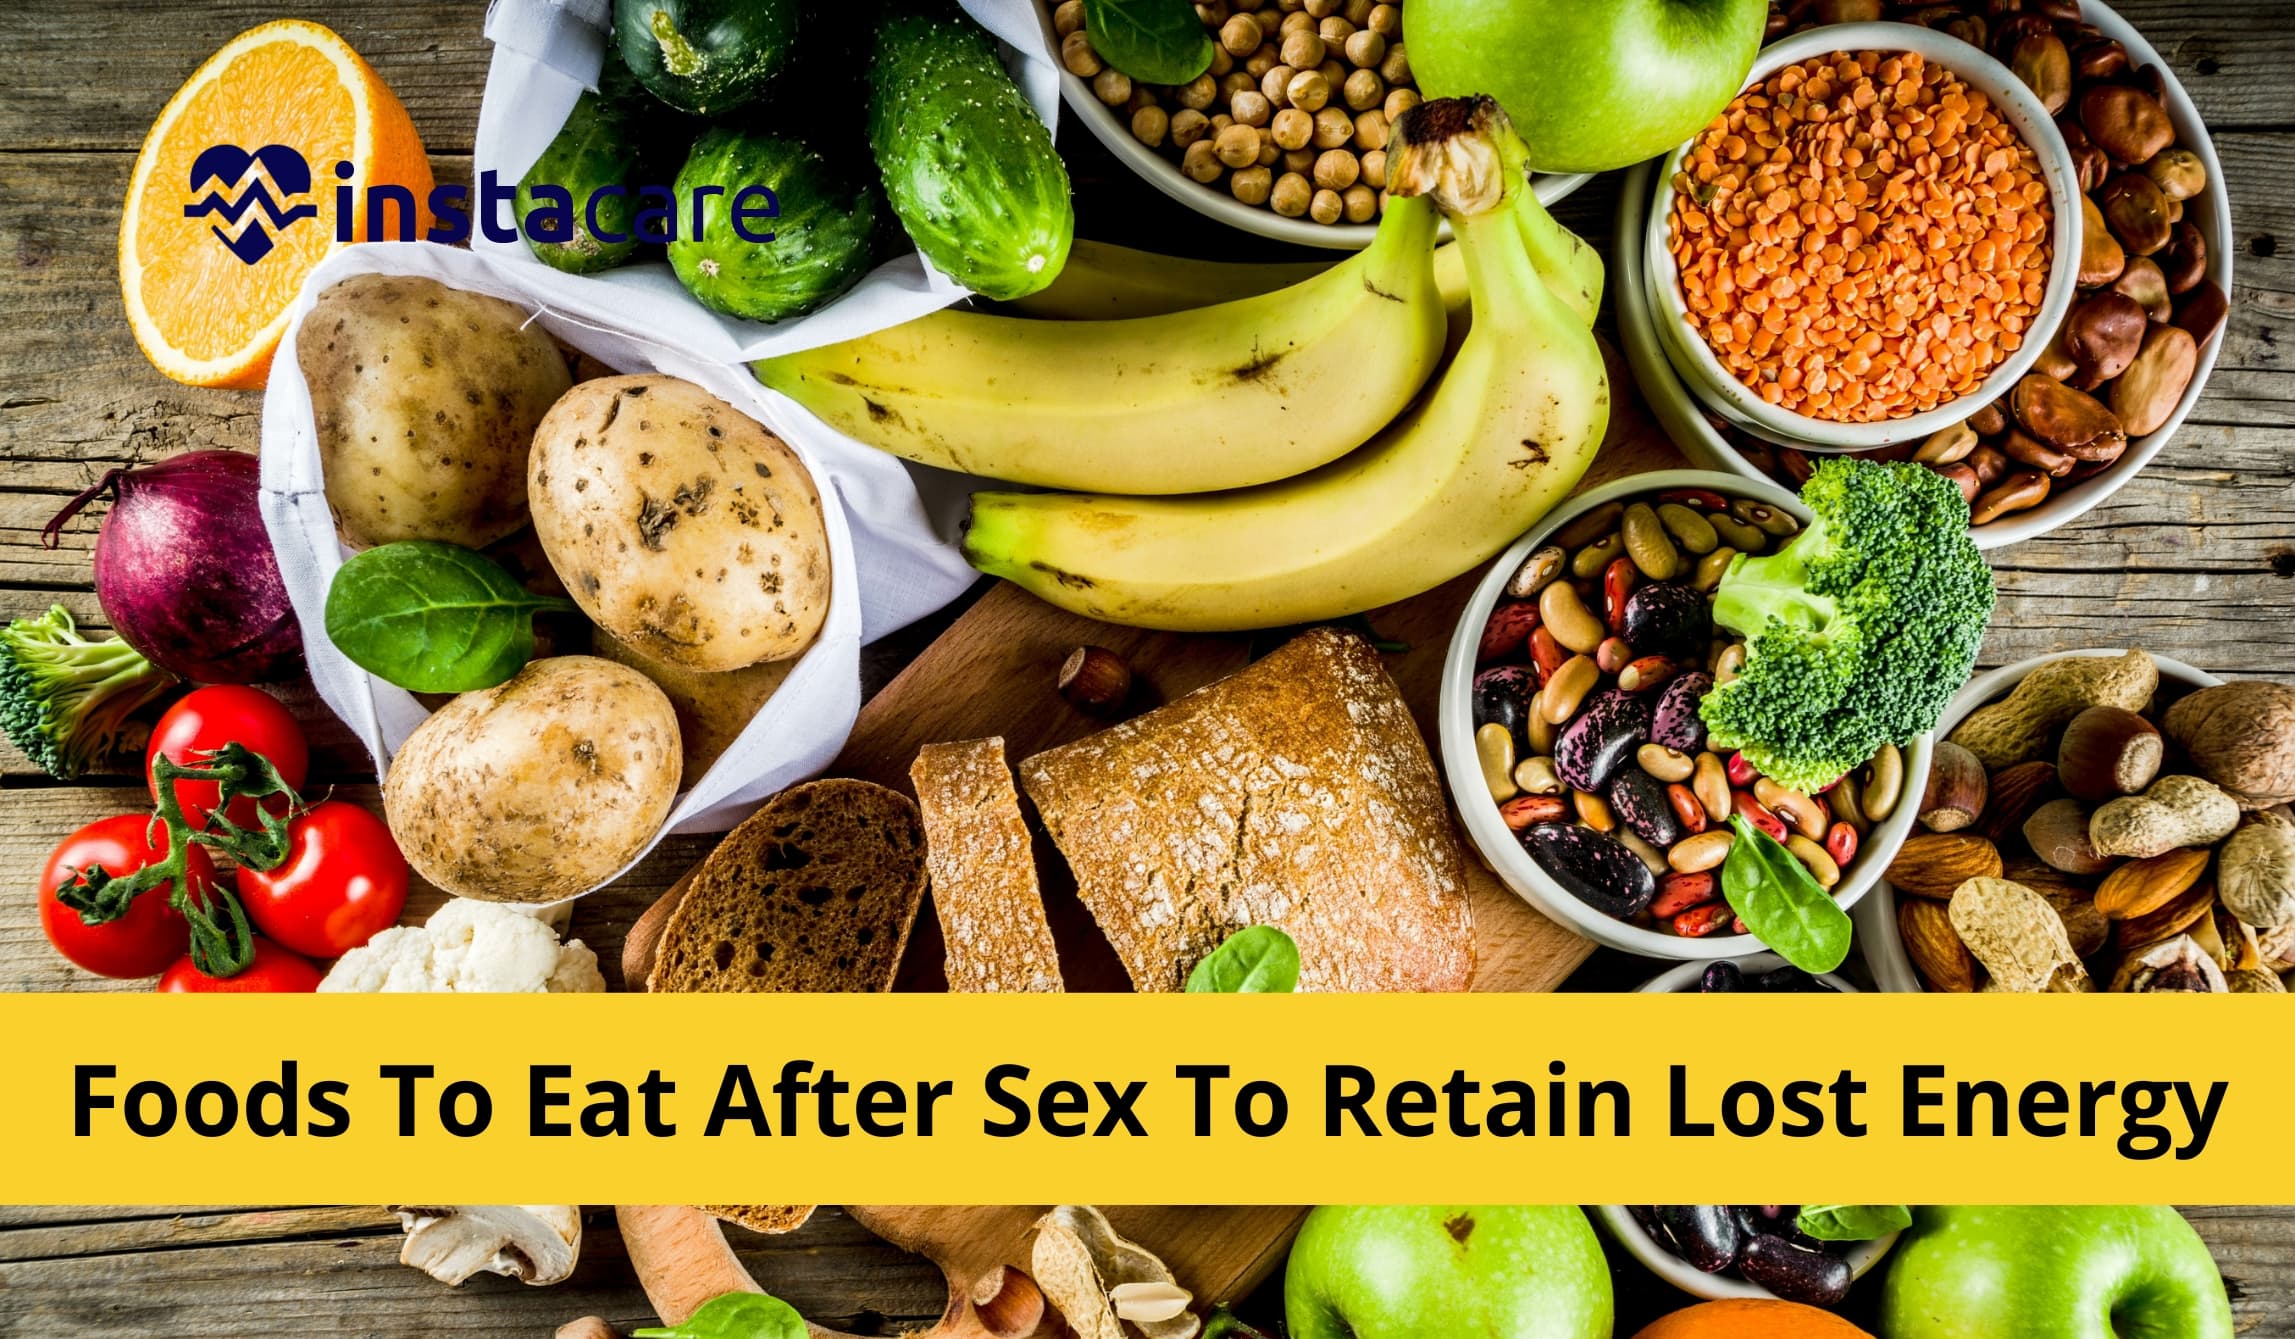 10 Foods You Should Eat After Sex To Retain Your Lost Energy pic